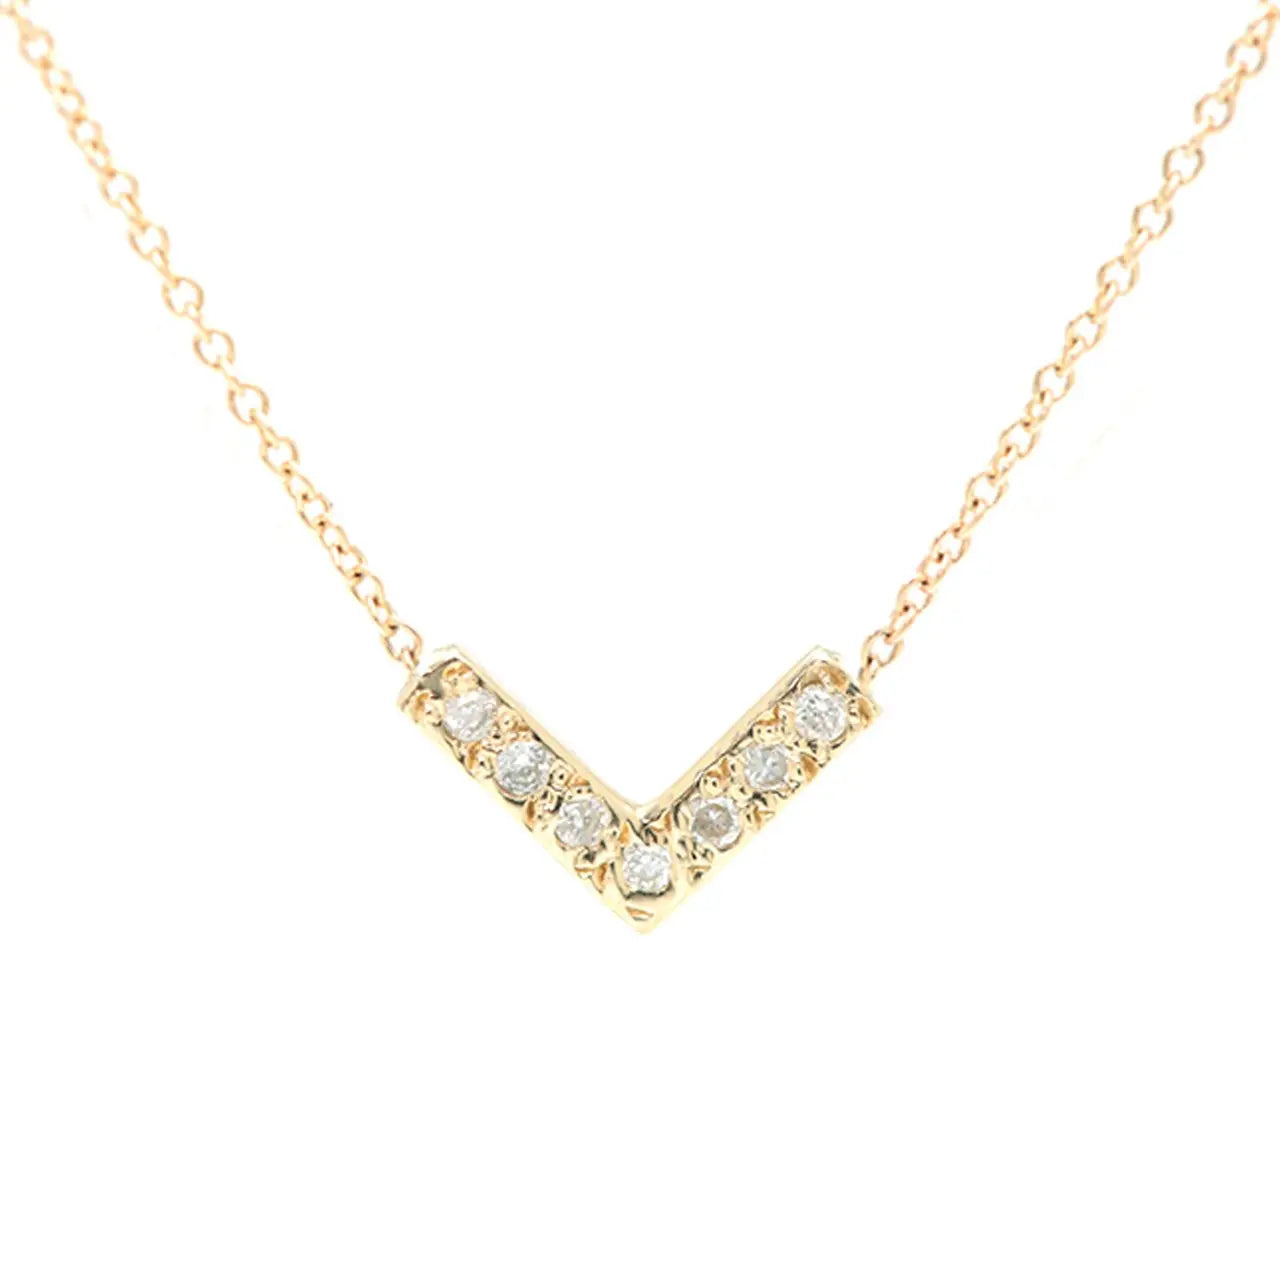 Open Triangle Necklace-White Diamond in 14k yellow gold  A simple open V-shaped golden pendant set with seven white diamonds.  7 white diamonds  Length: 16" chain  Please allow 4 weeks for delivery, if an item is out of stock  Designed by Aili Jewelry